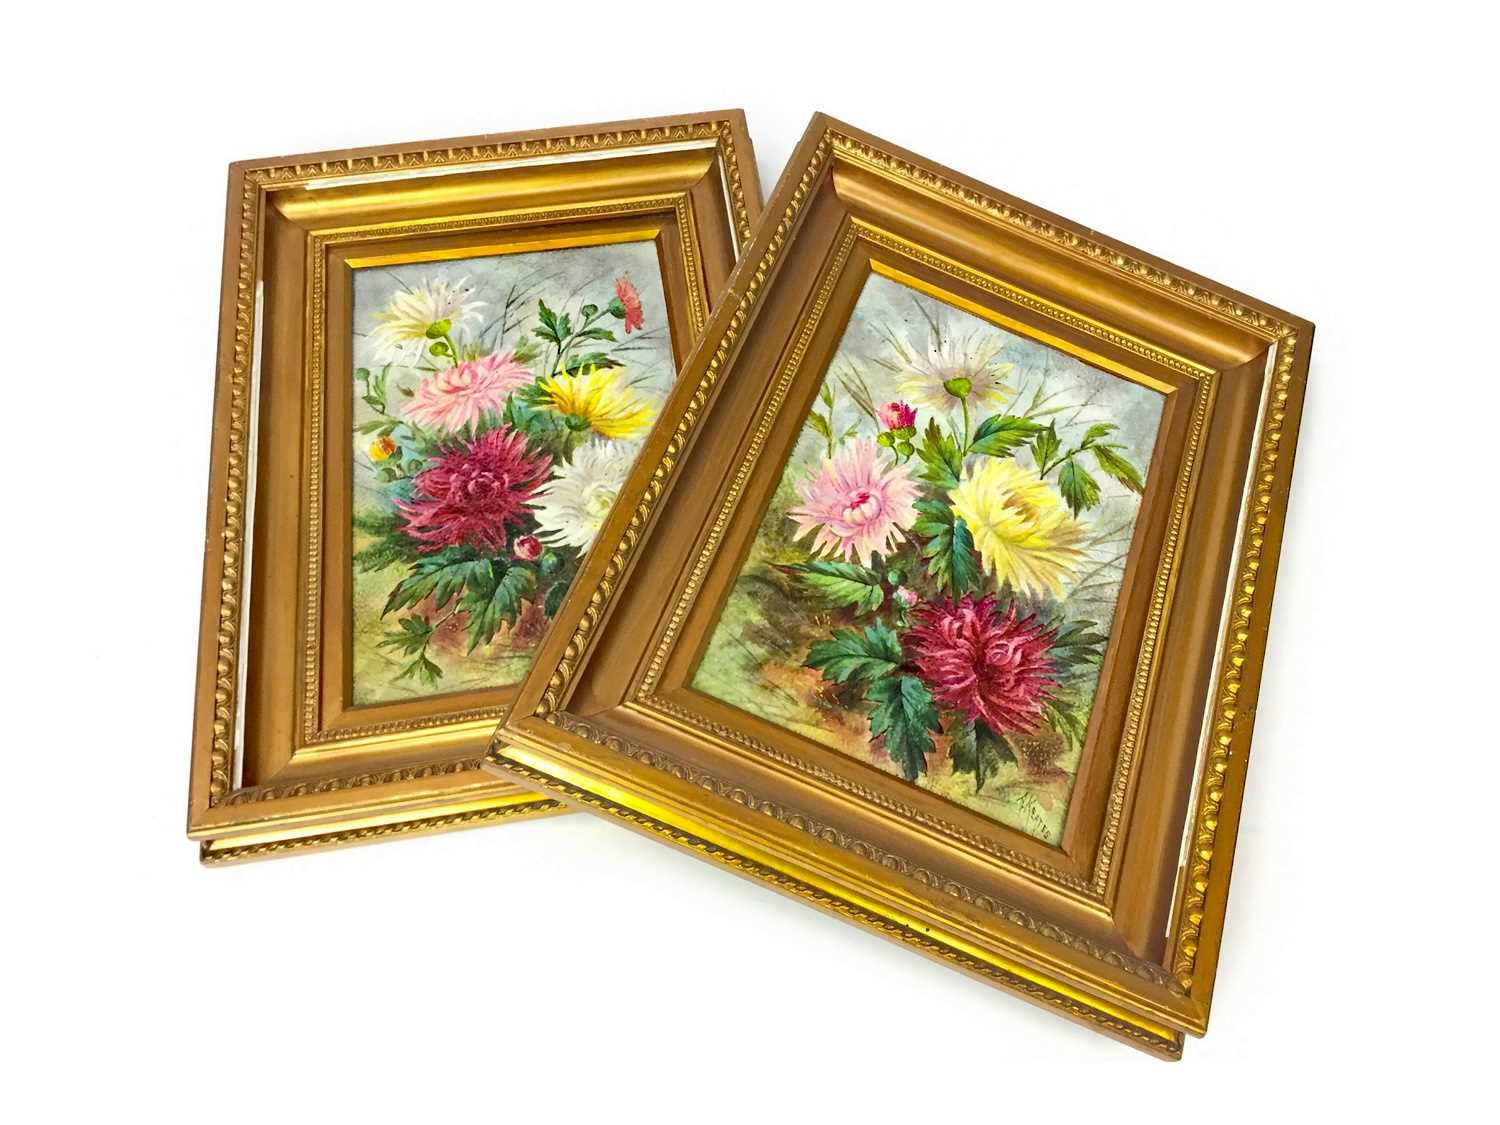 Lot 1045 - A LOT OF TWO HAND PAINTED CERAMIC PANELS DEPICTING CHRYSANTHEMUMS